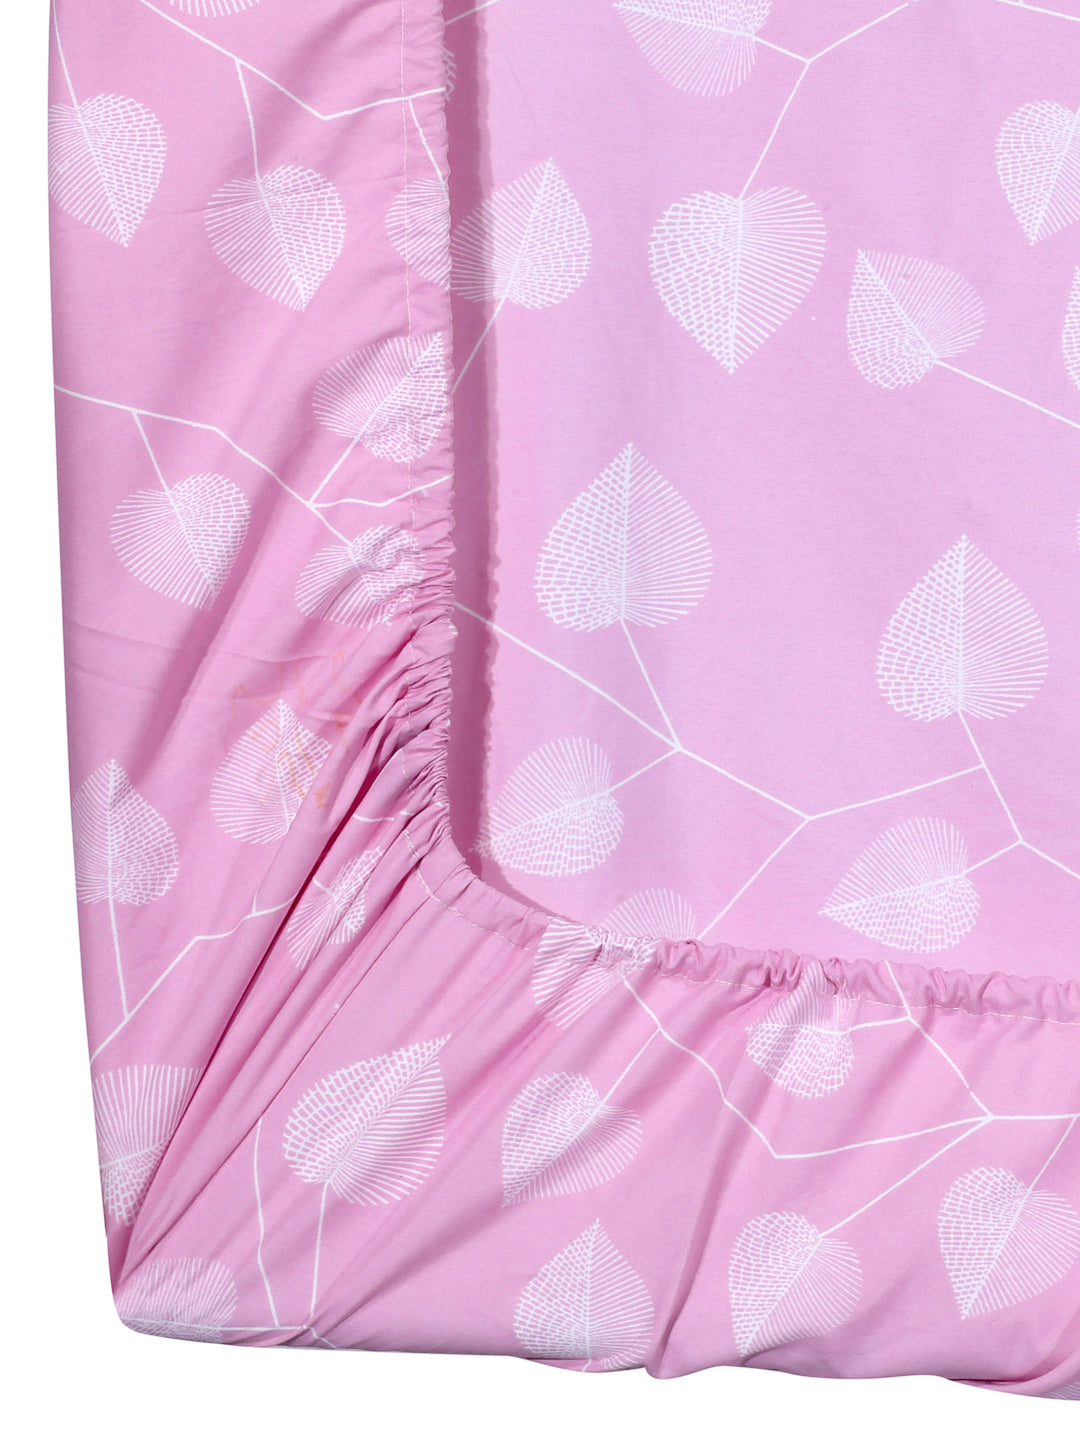 Arrabi Pink Leaf TC Cotton Blend Double Size Fitted Bedsheet with 2 Pillow Covers (250 X 220 cm)